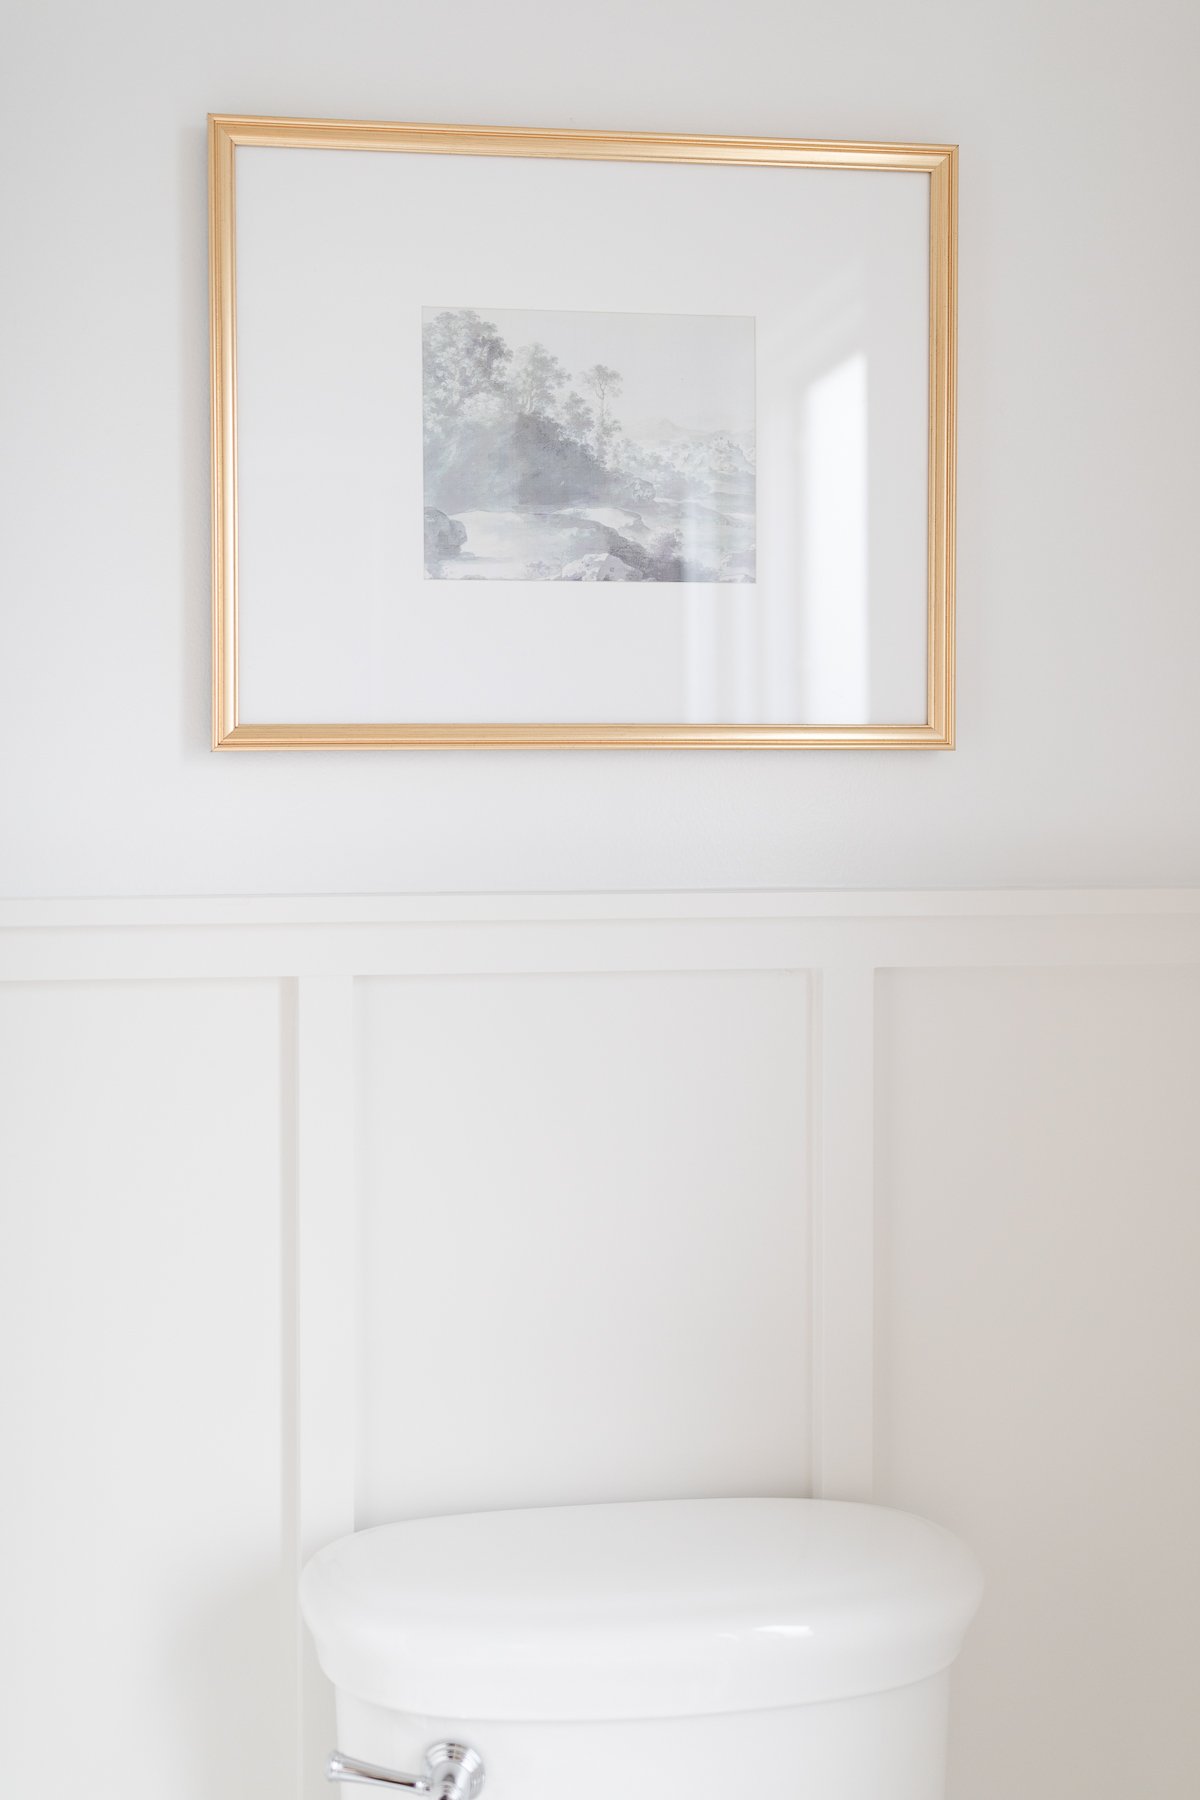 A toilet in a white bathroom with a framed picture sourced from Studio McGee above it.